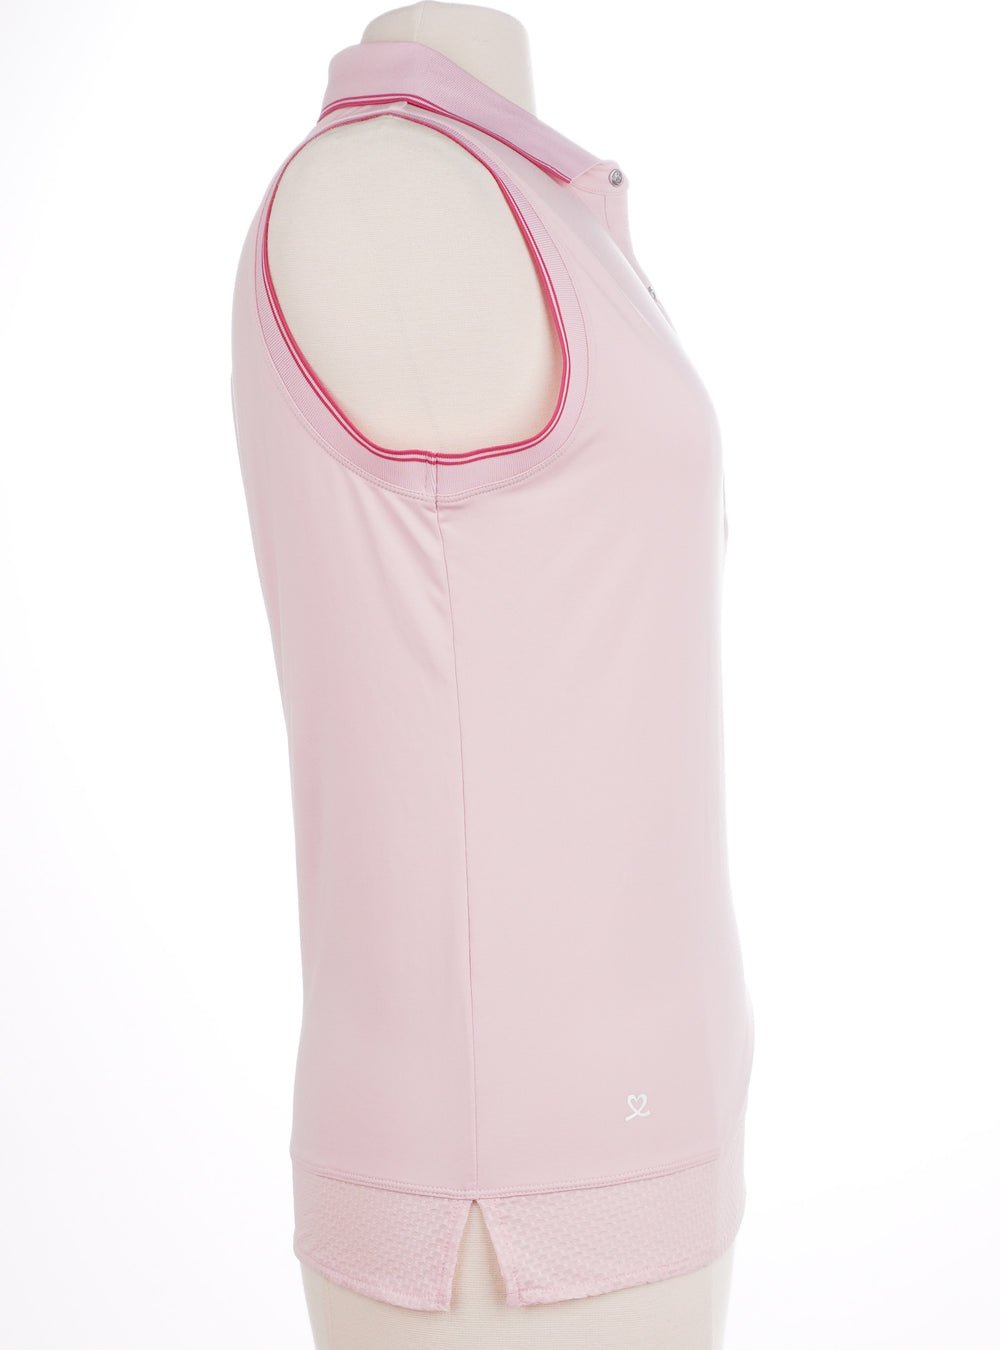 Daily Sport Pretty in Pink Sleeveless Top - Size Large - Skorzie